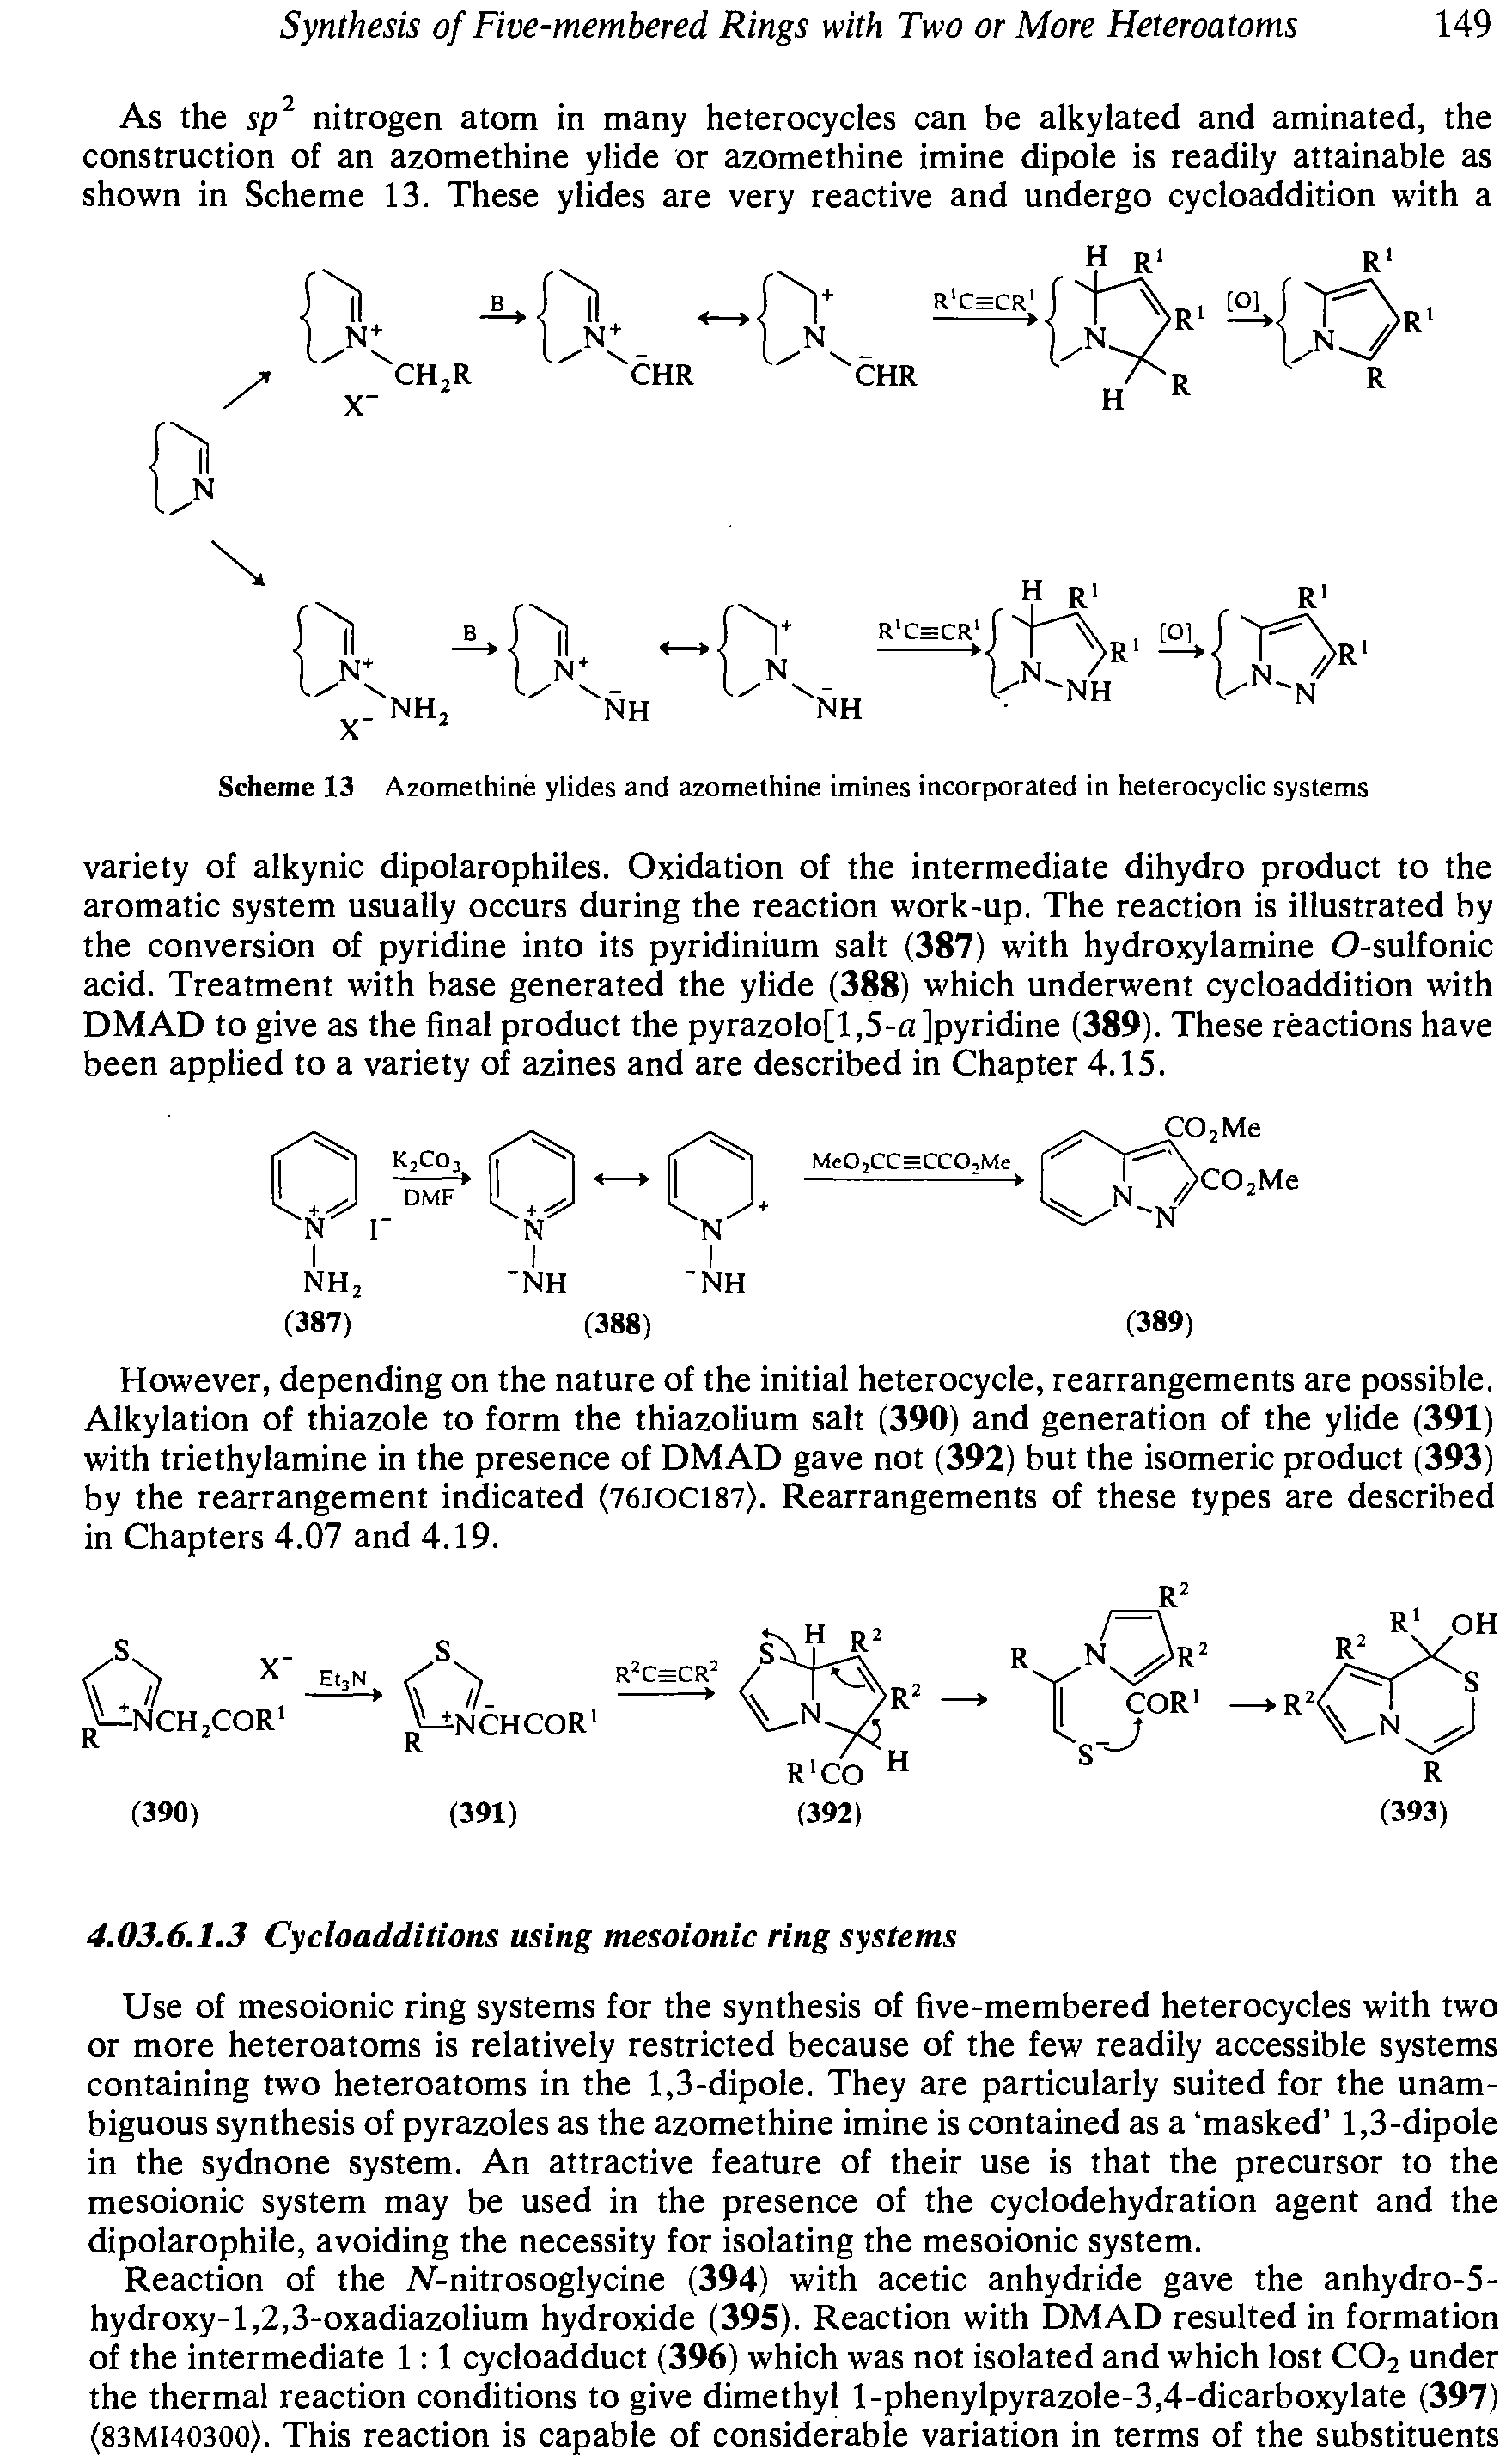 Scheme 13 Azomethine ylides and azomethine imines incorporated in heterocyclic systems...